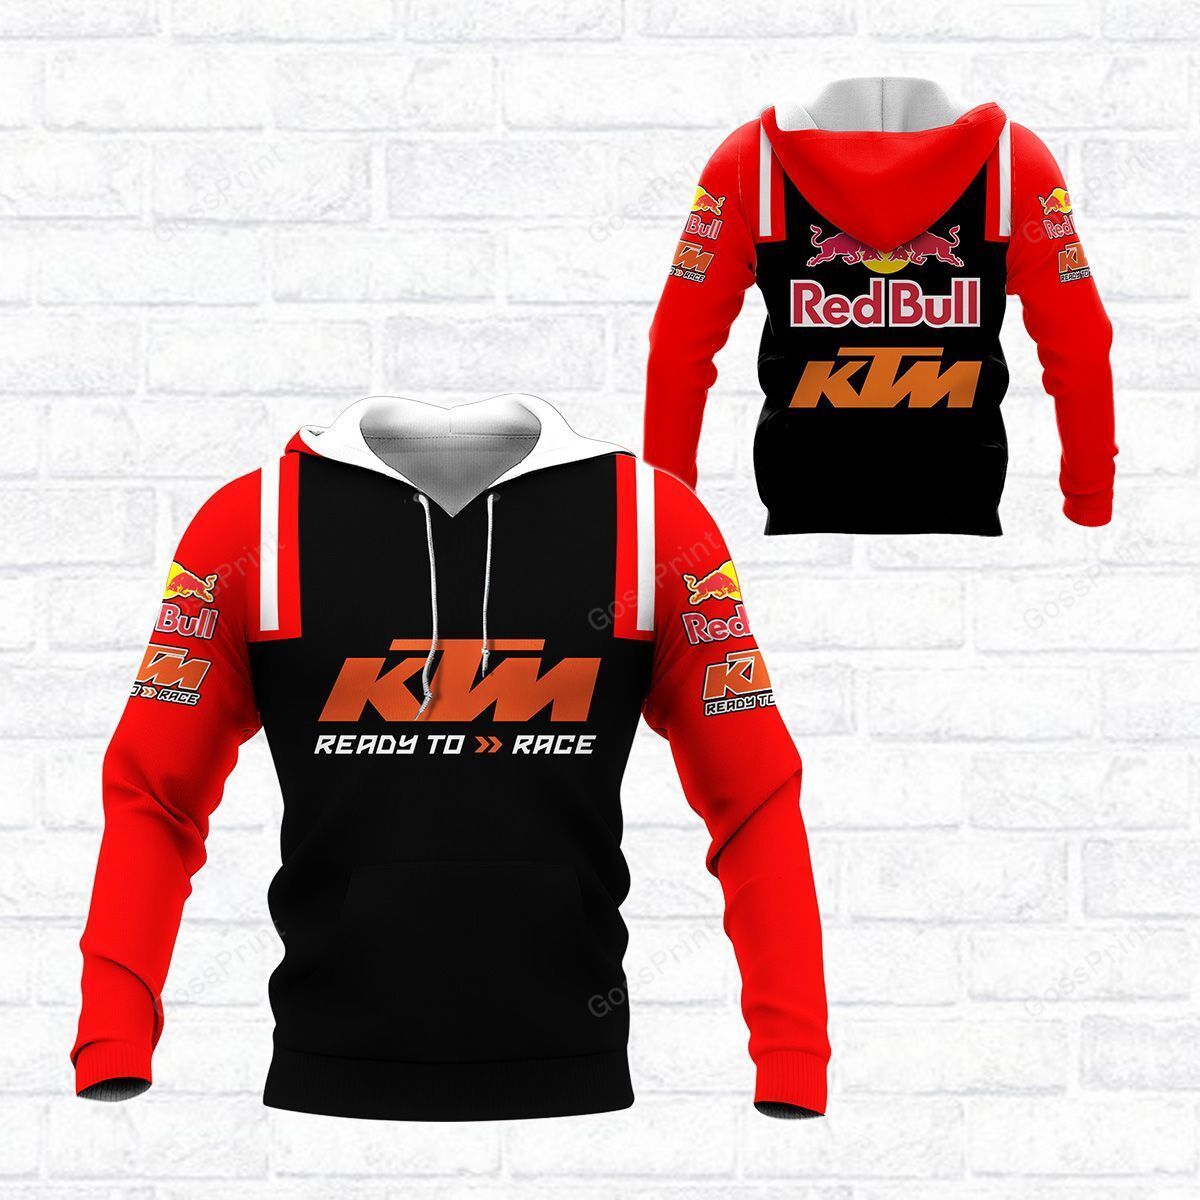 Shop now and get ready to make crazy up in style with top custom hoodie below! 85